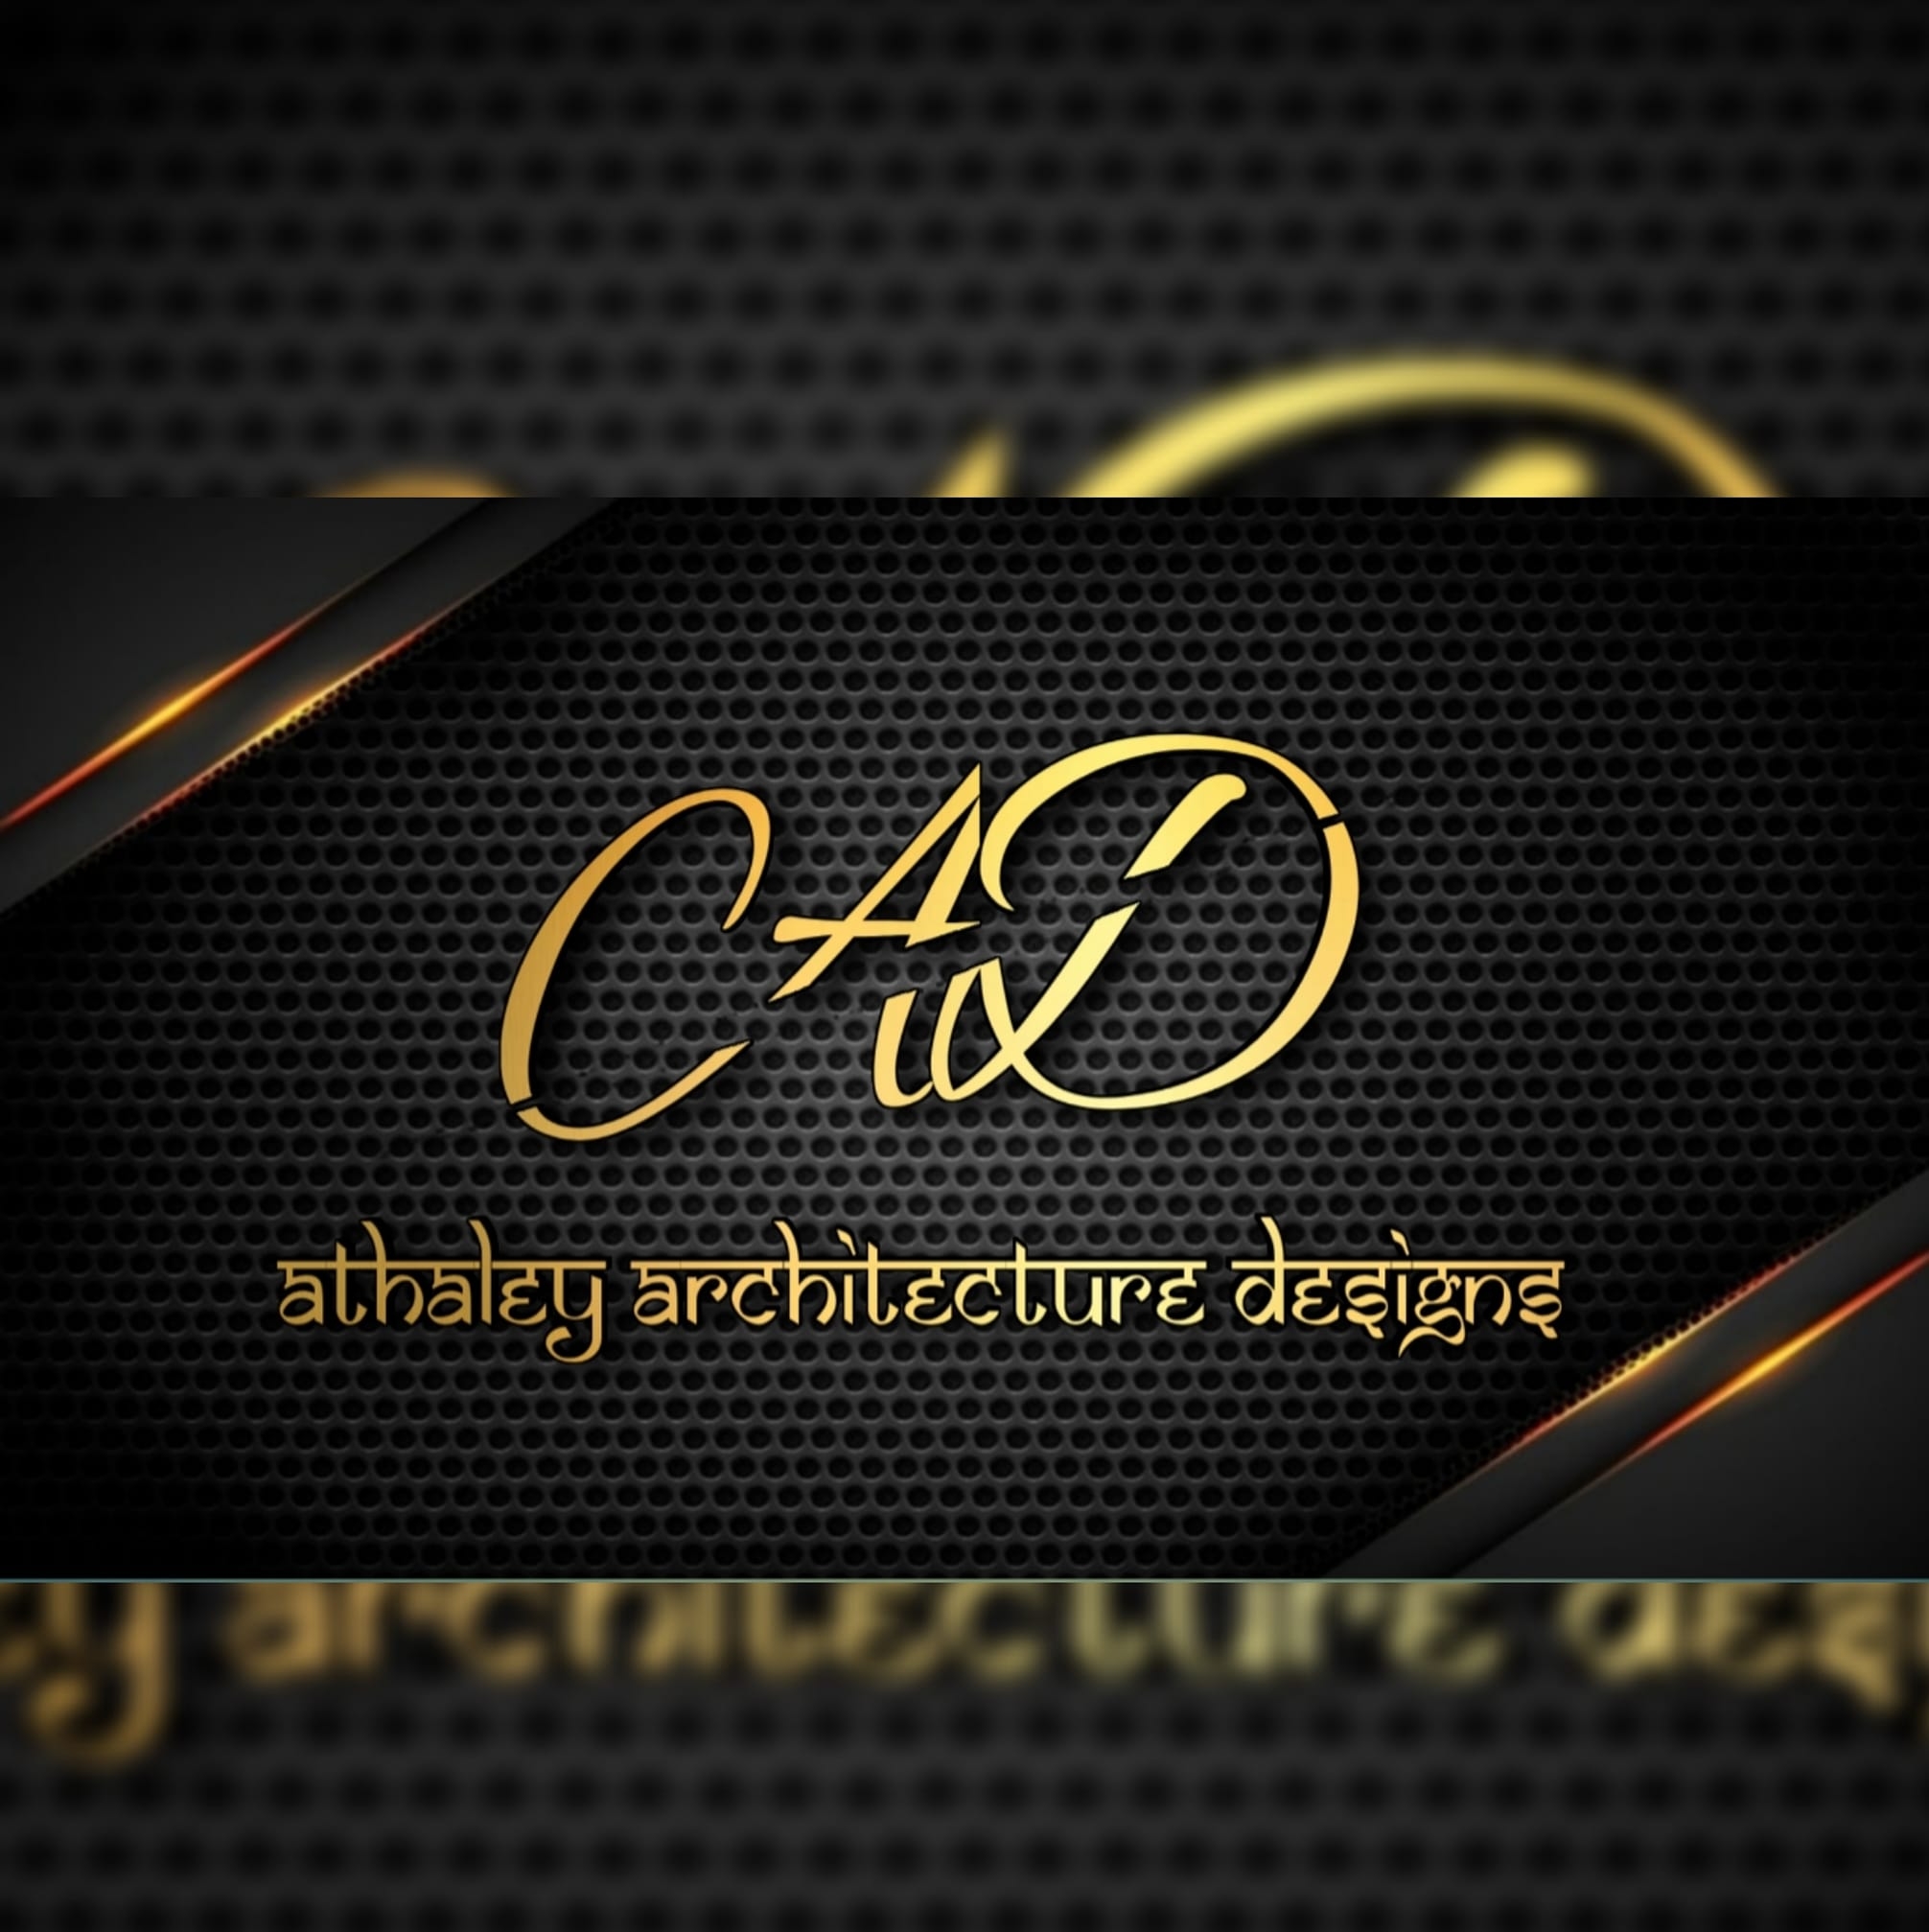 ATHALEY ARCHITECTURAL DESIGN'S|Architect|Professional Services